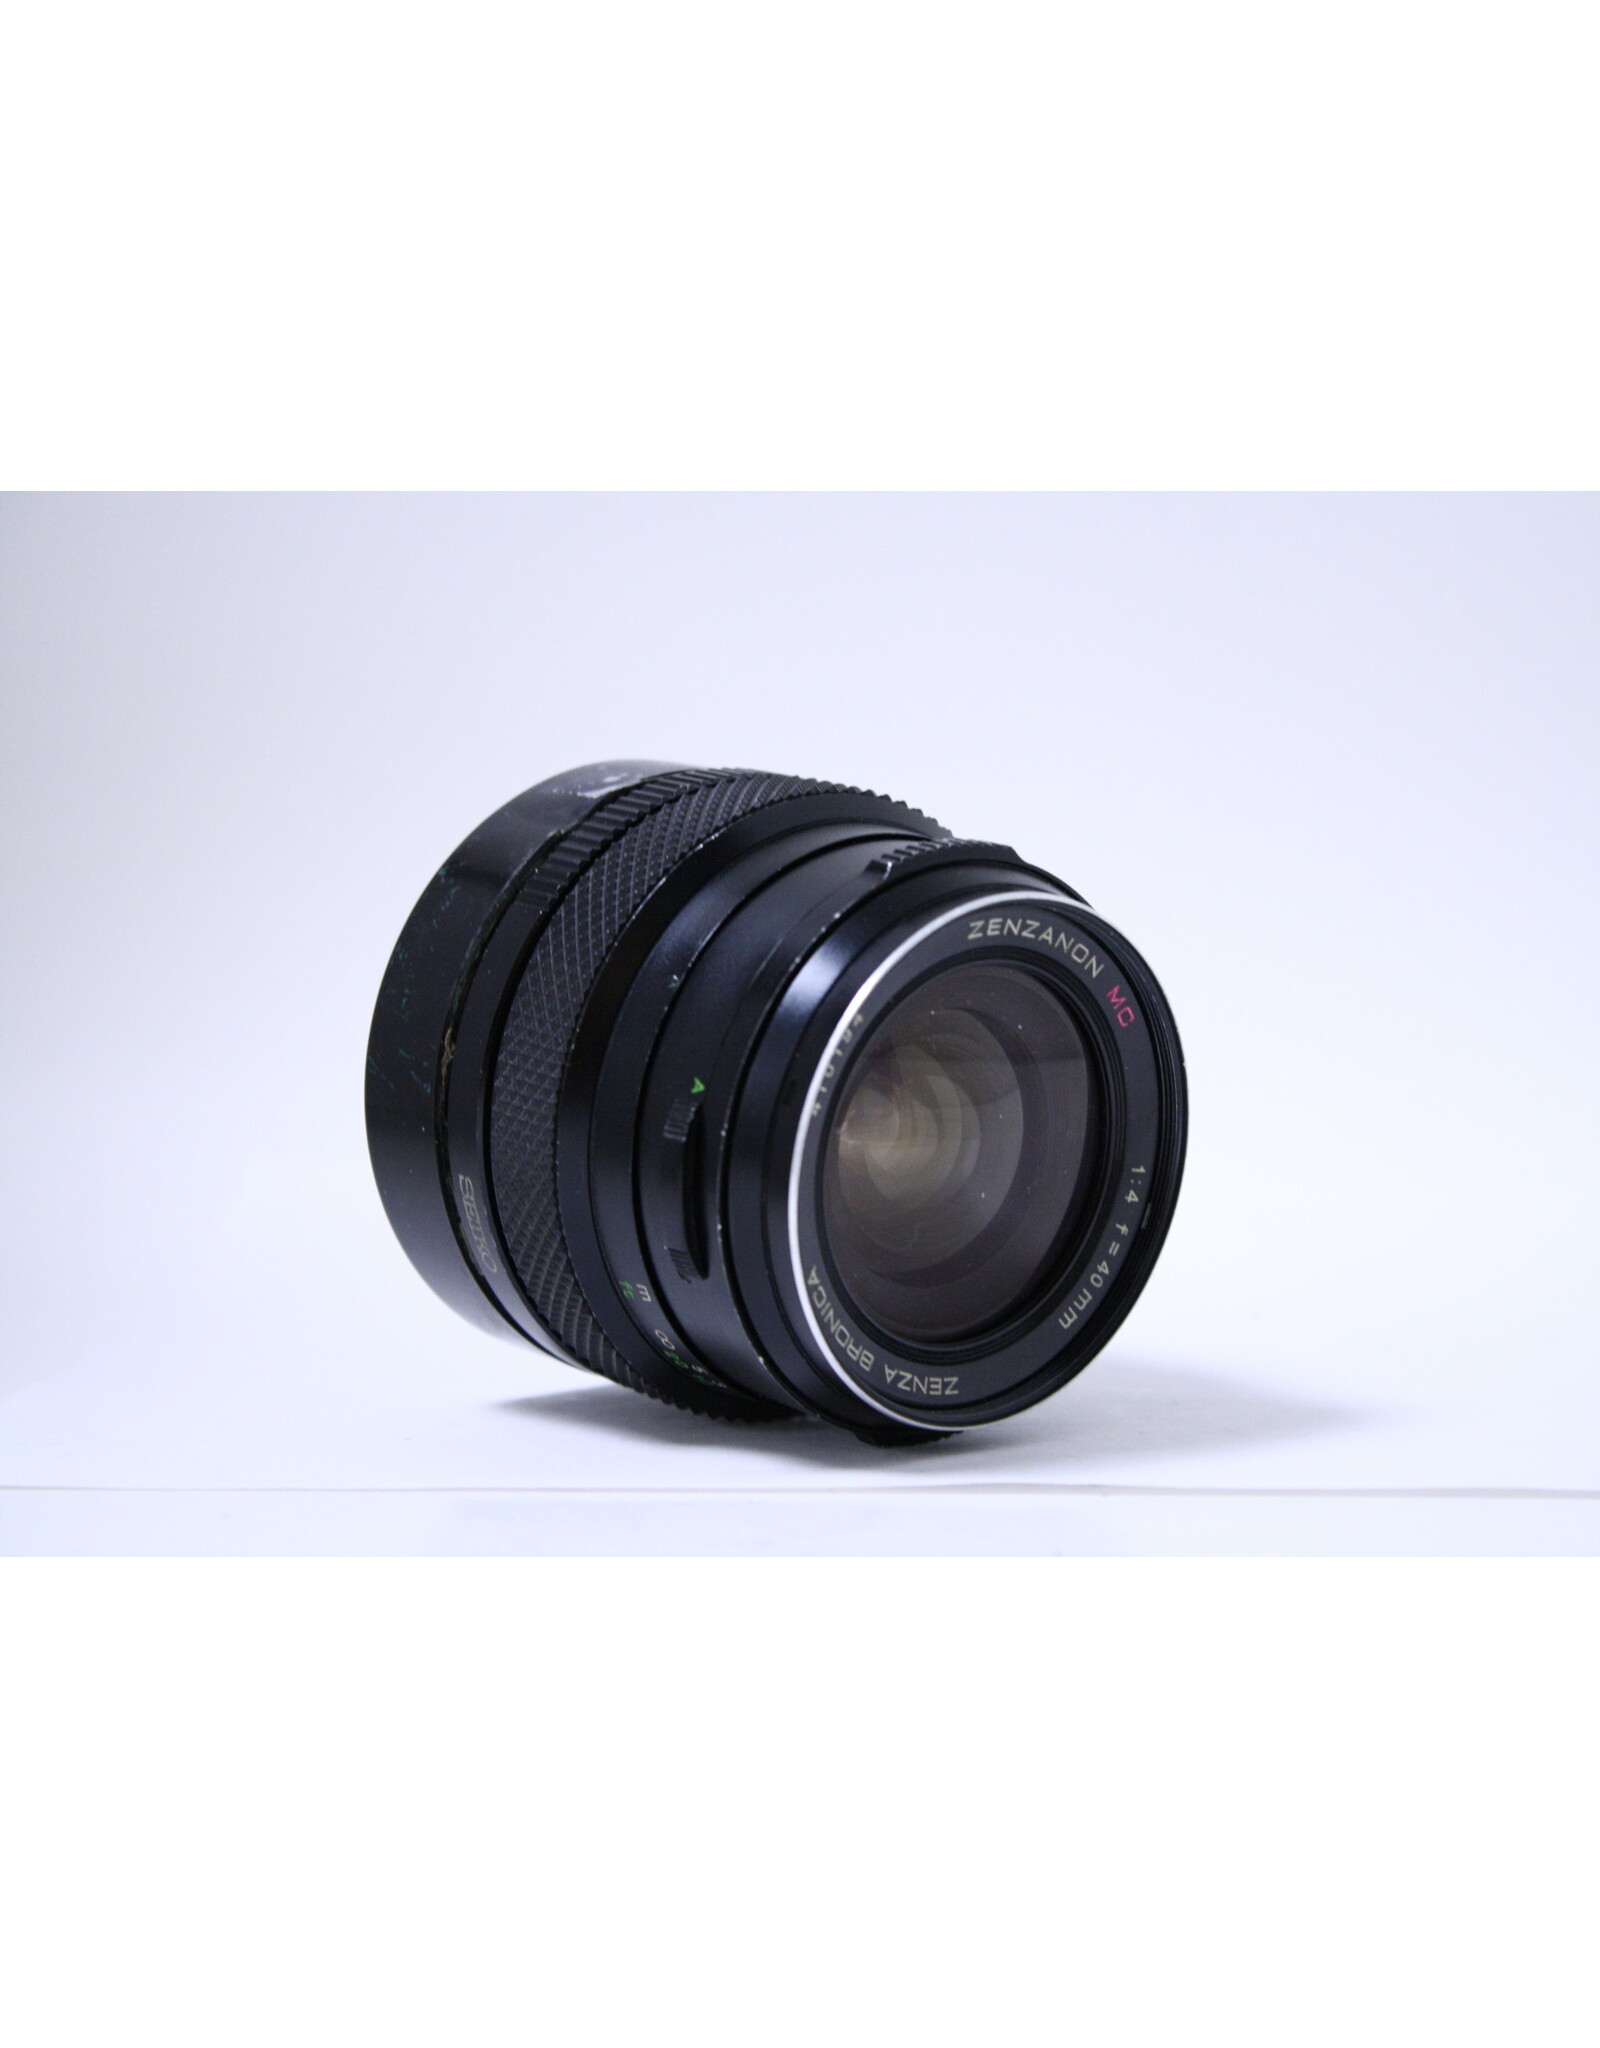 Bronica Zenzanon MC 40mm f4 Lens for Bronica ETR  (Pre-owned)